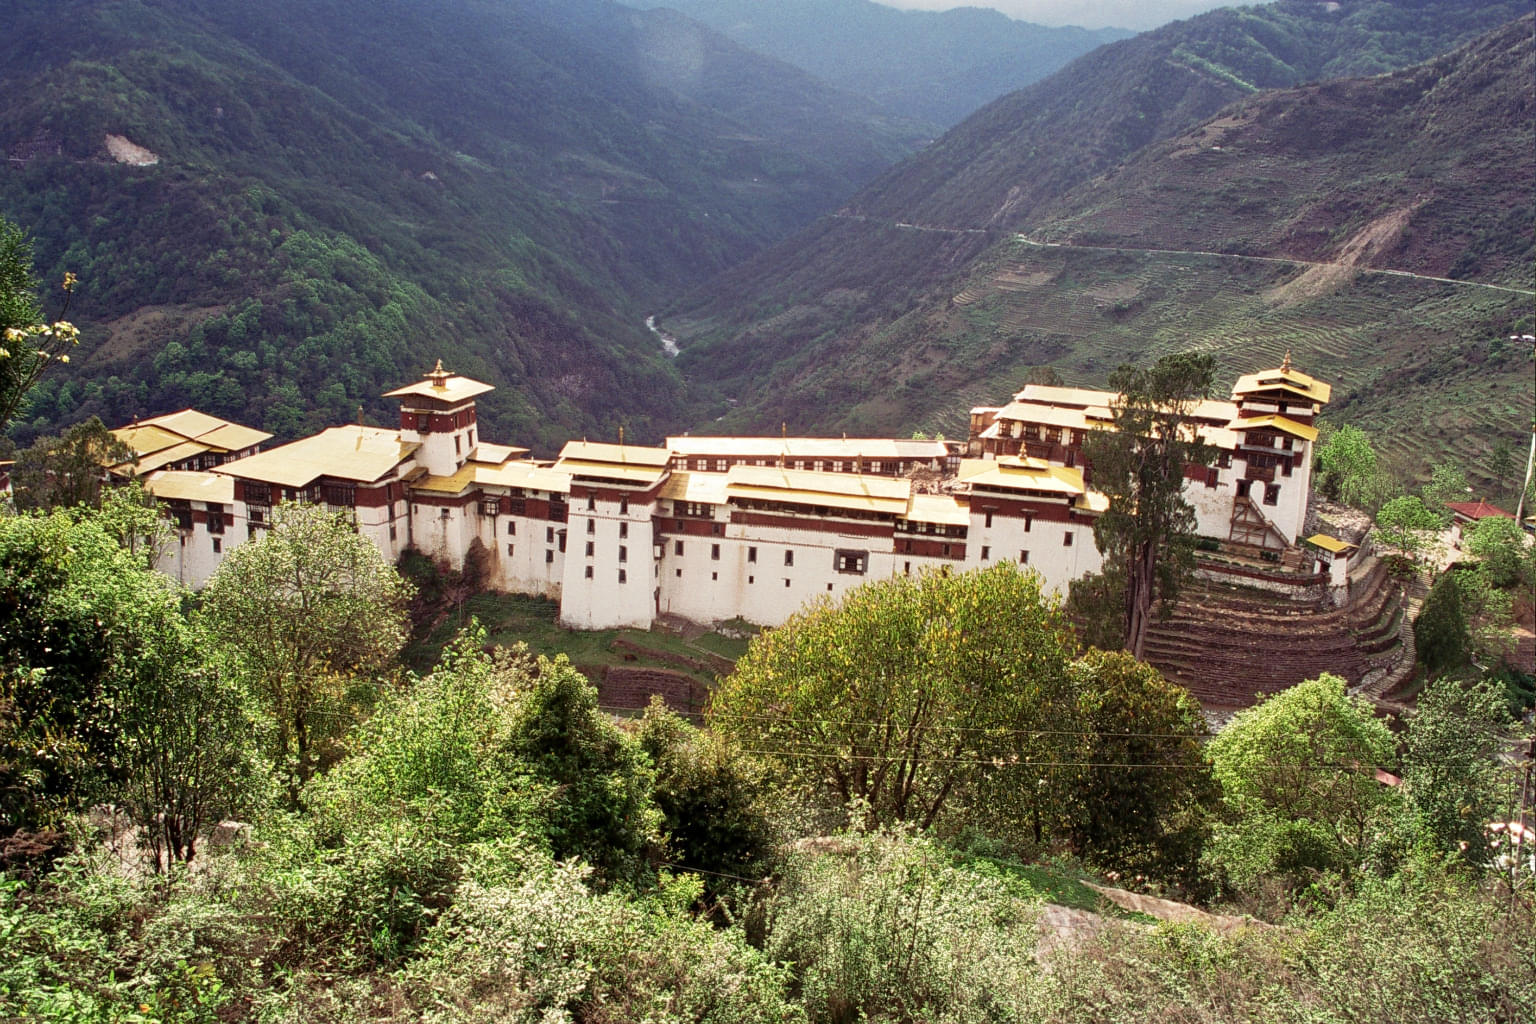 Bumthang Valley Overview